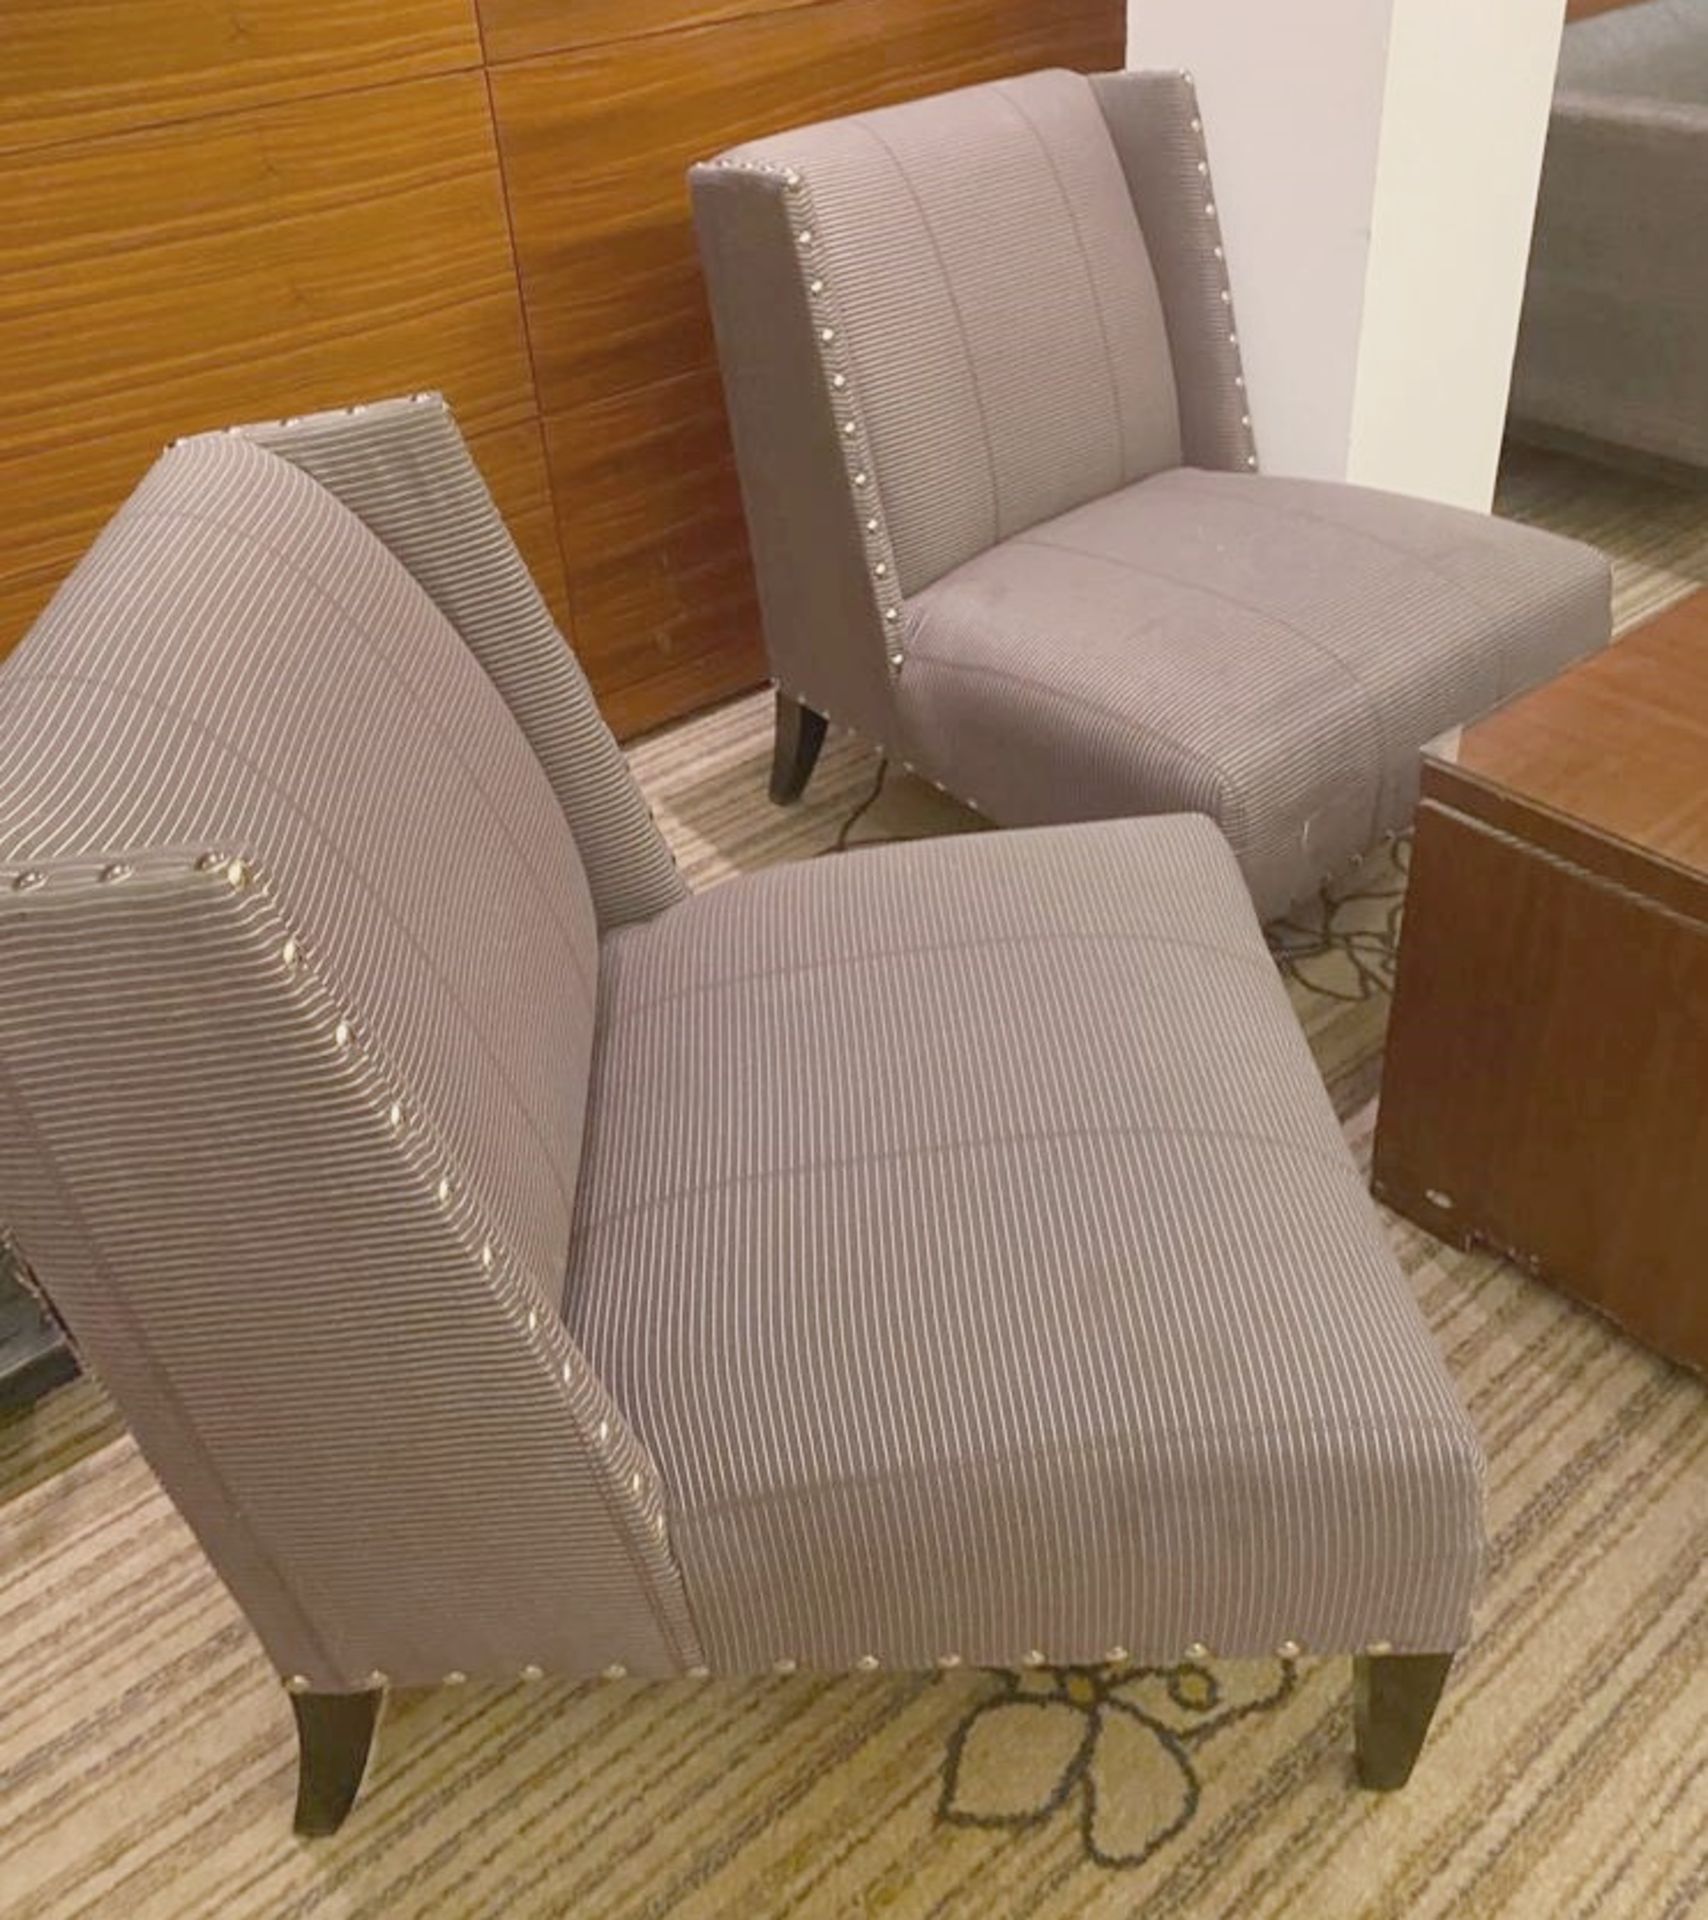 A Pair of Opulent Upholstered & Studded Commercial Armchairs - Recently Procured From A Luxury 5-